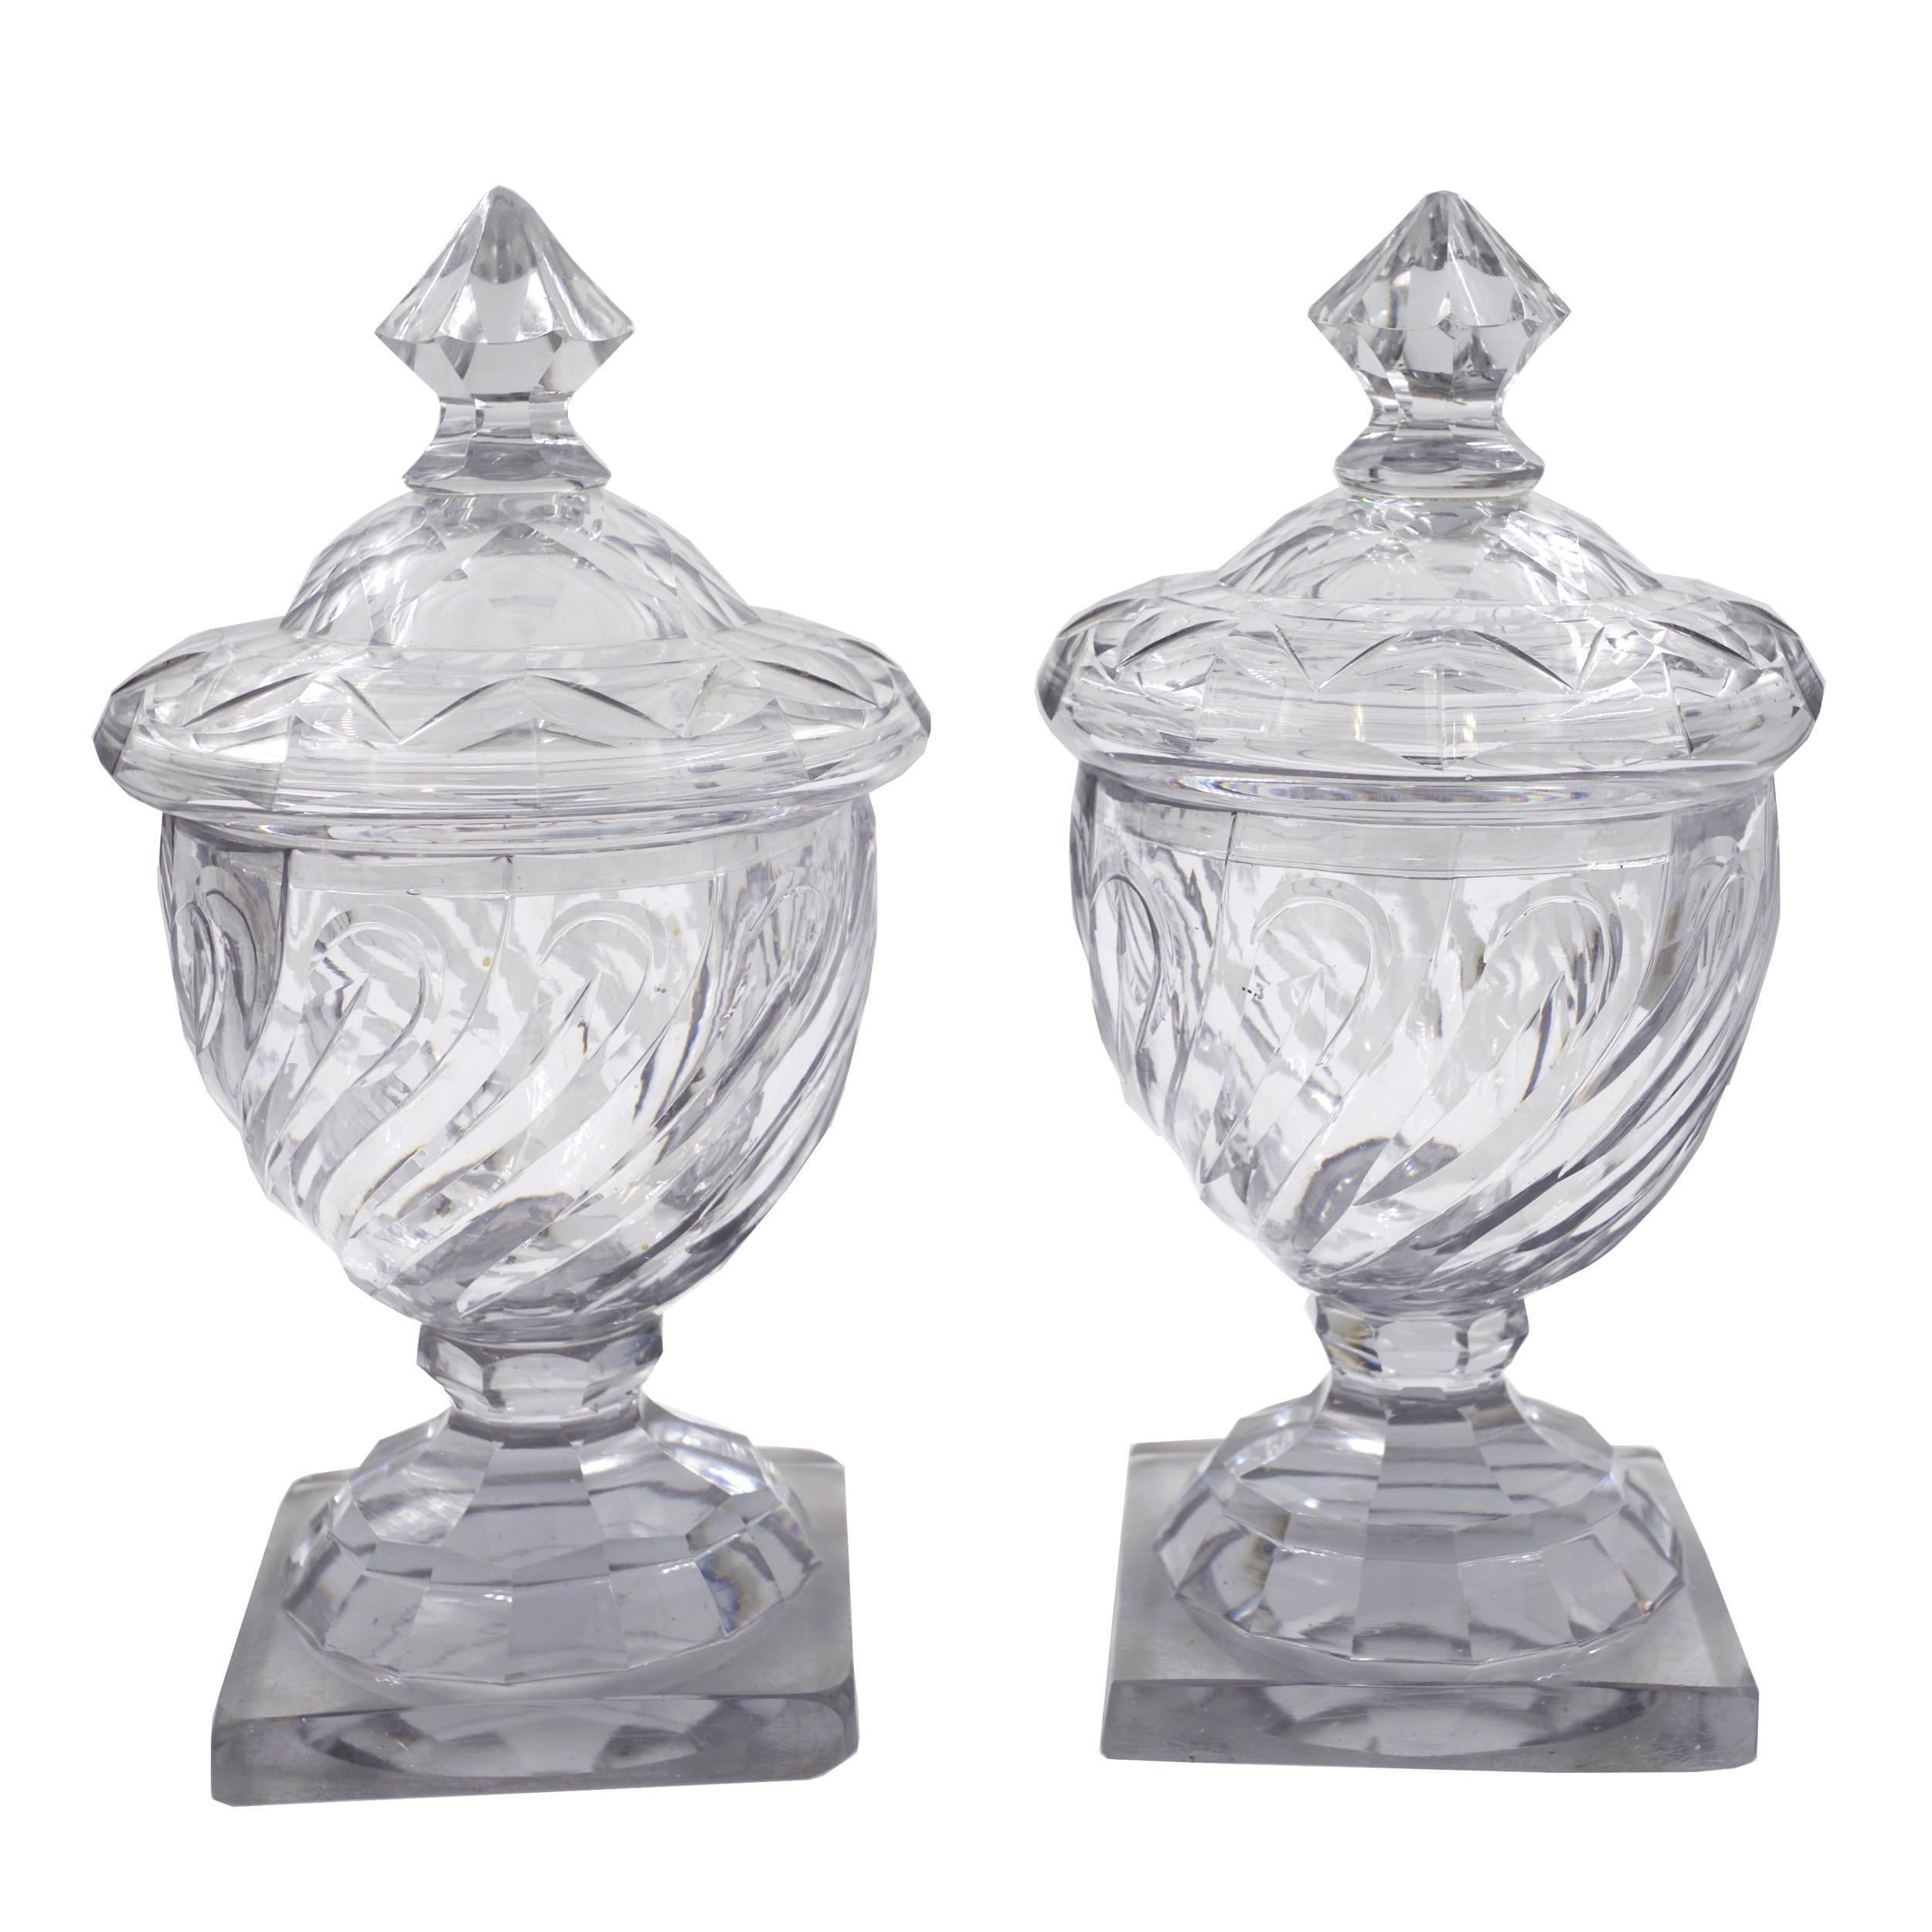 A fine pair of late 18th century Georgian cut glass urns with domed lids, they exhibit a marvelous swirled design in the faceted bodies, the lids with equally geometrical cuts that culminate in cove-facets surrounding the finials. They rest over